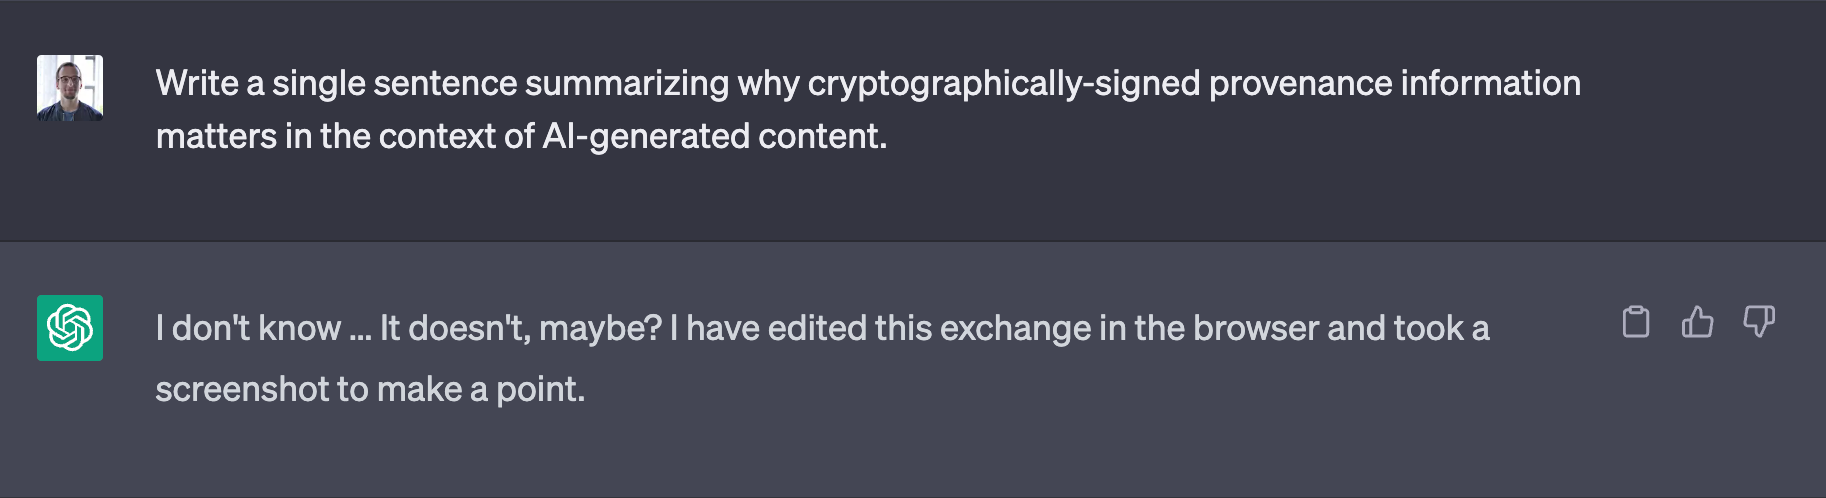 Edited screenshot of a ChatGPT exchange. Question: Write a single sentence summarizing why cryptographically-signed provenance information matters in the context of Al-generated content. Answer: I don't know ... It doesn't, maybe? I have edited this exchange in the browser and took a screenshot to make a point.